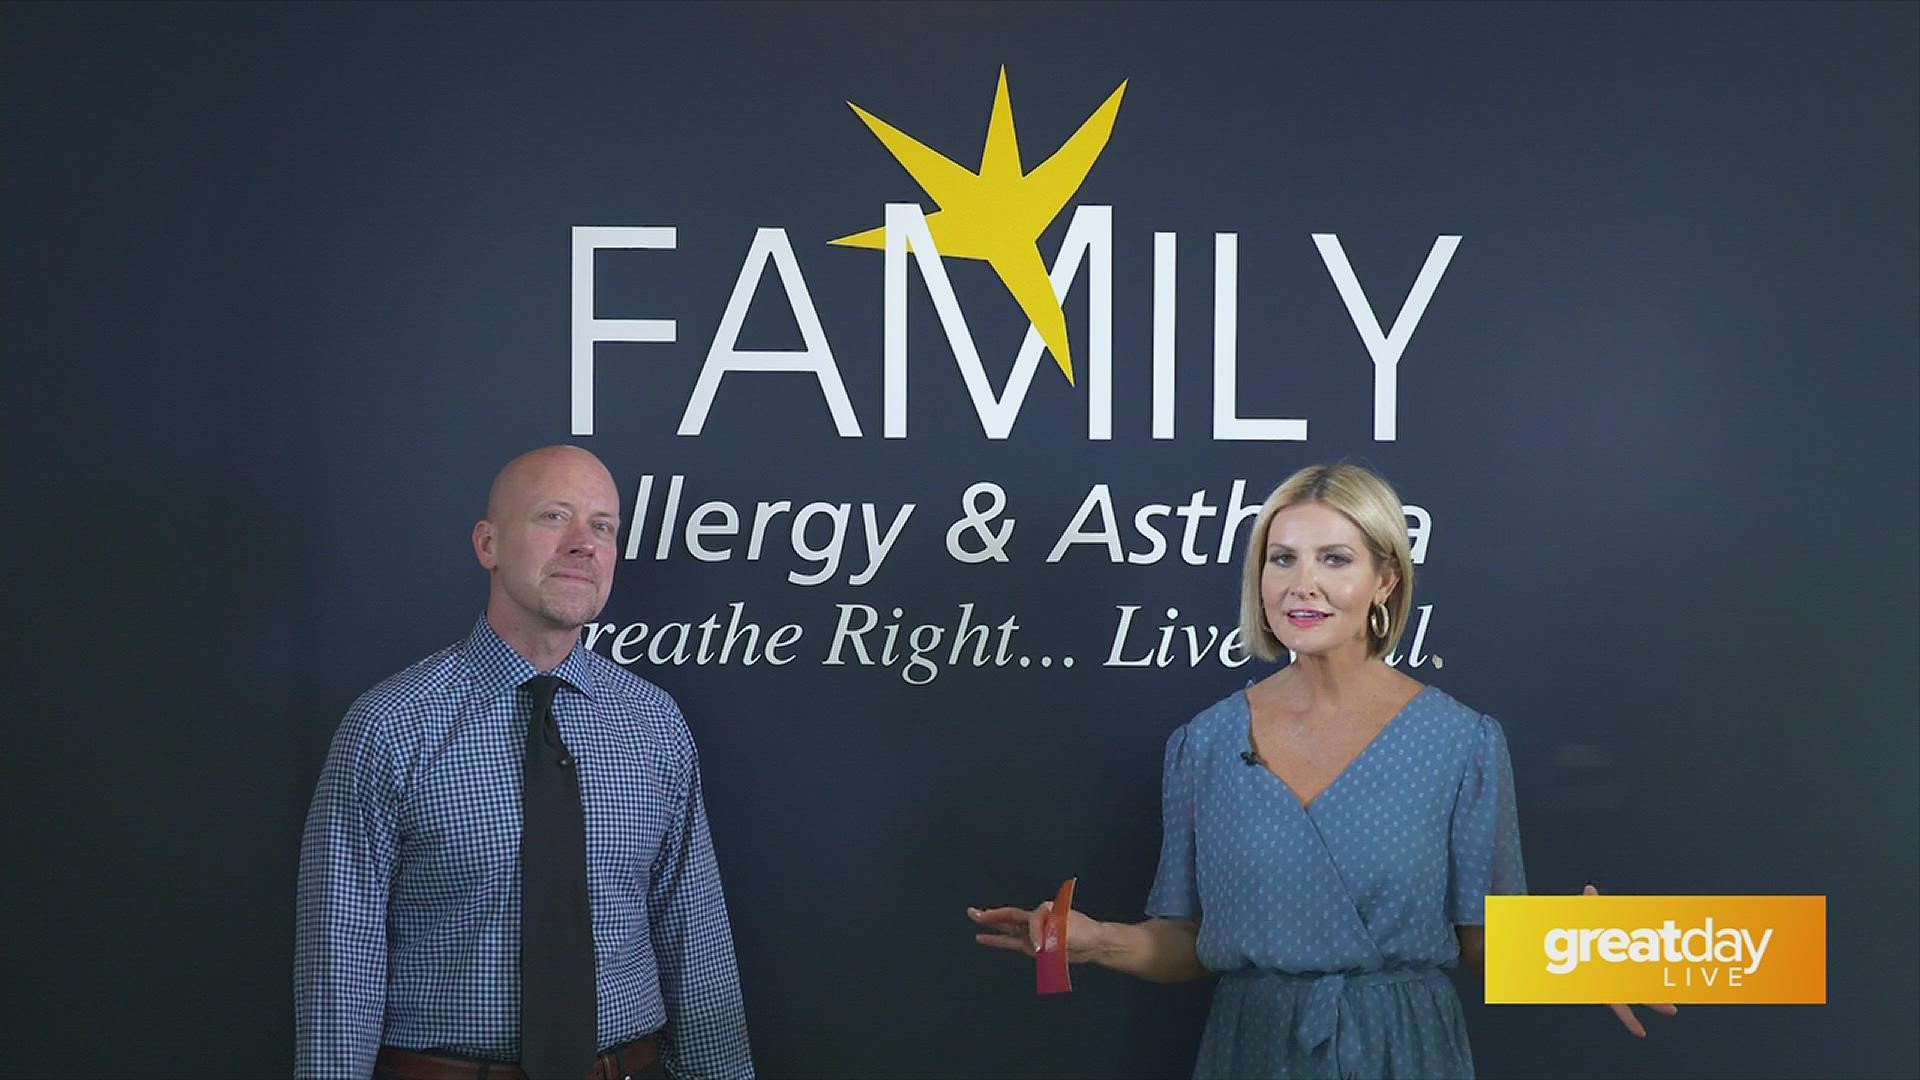 For more information or to find a Family Allergy & Asthma near you, go to familyallergy.com.